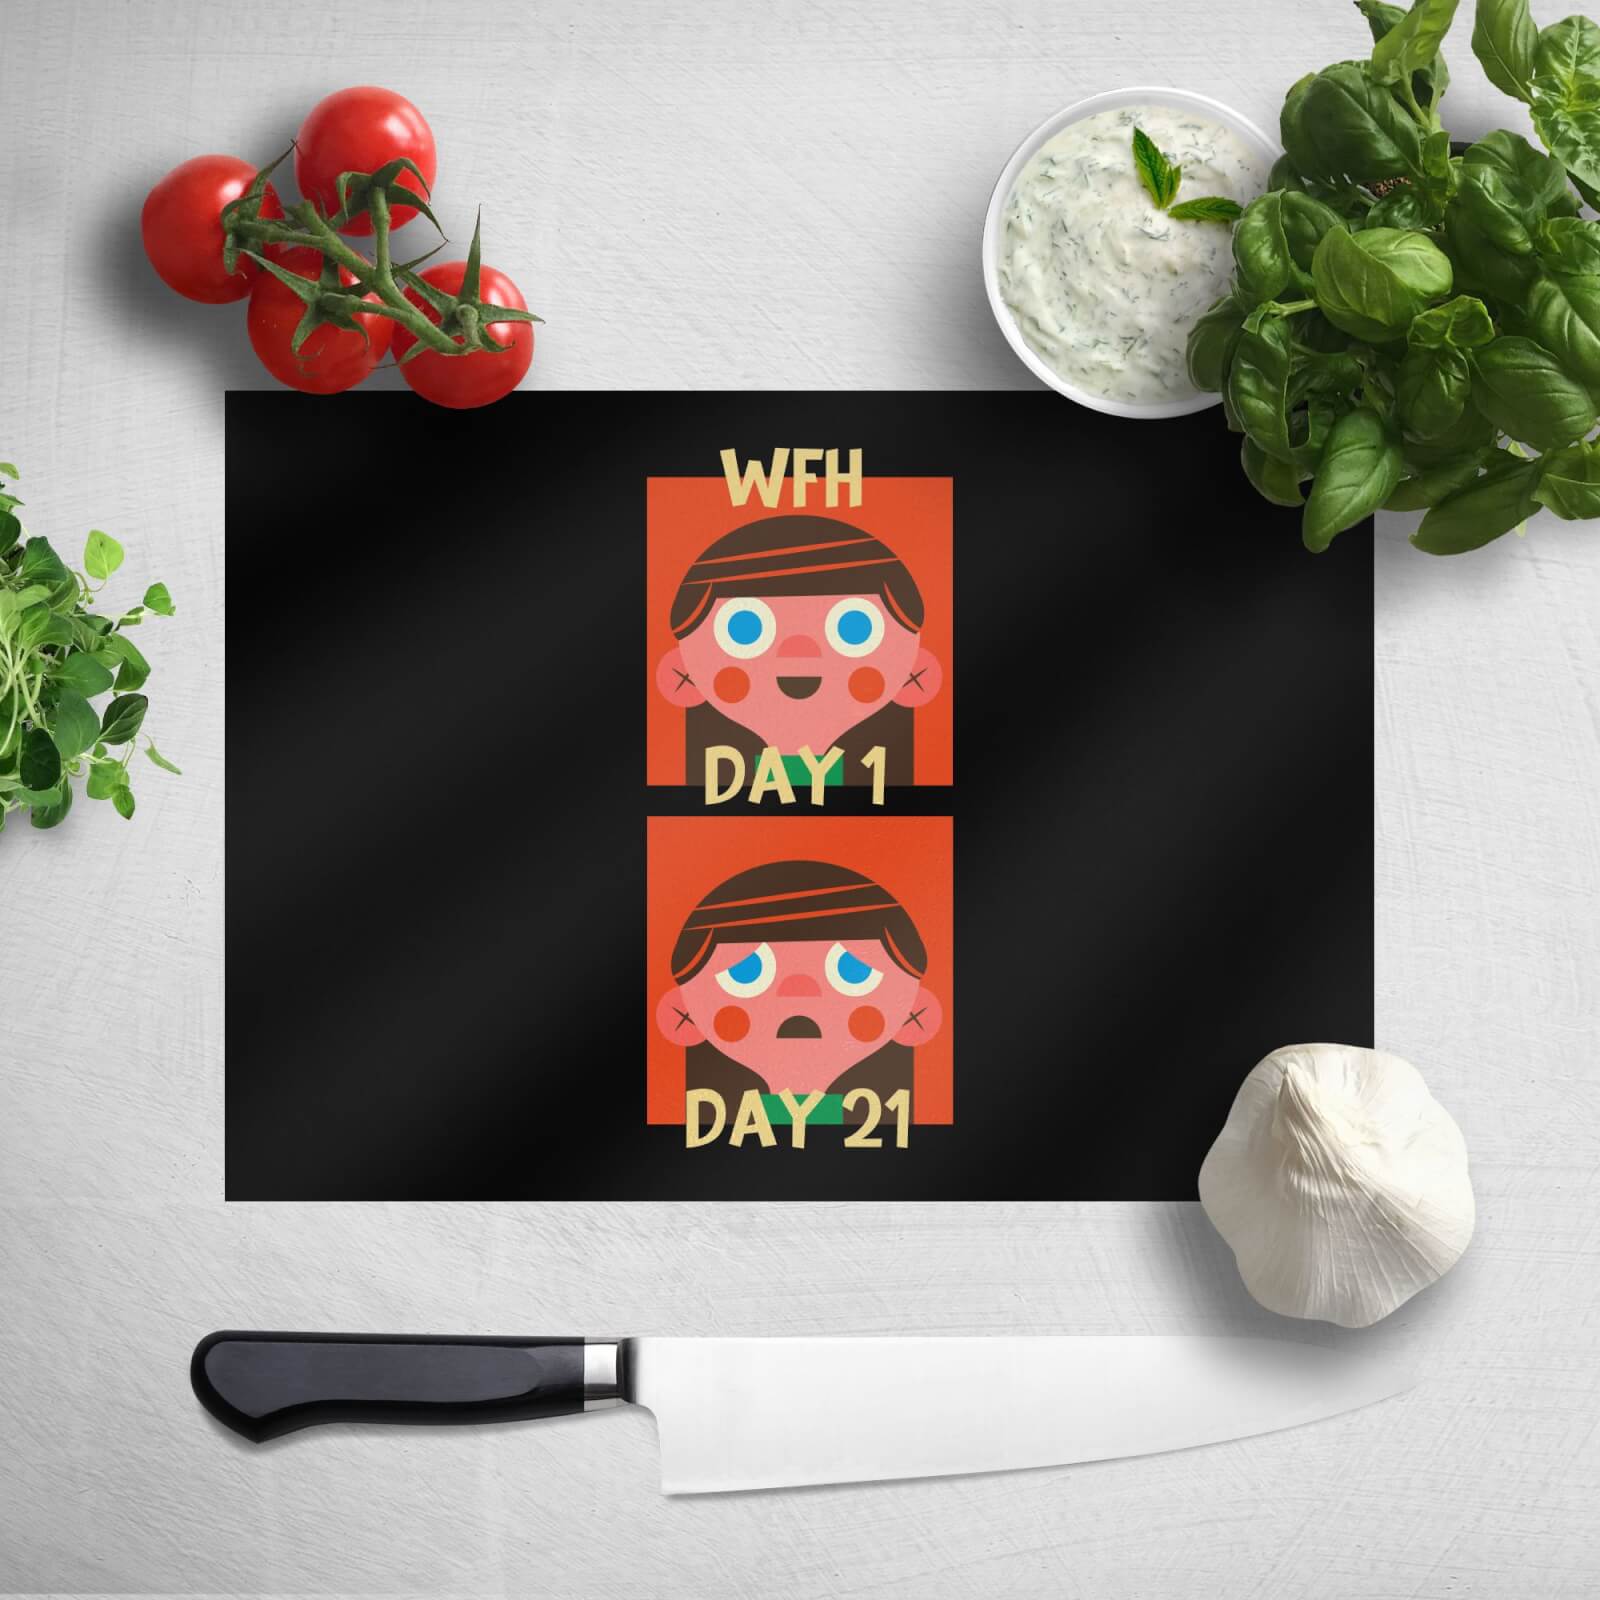 How Many Days? Chopping Board